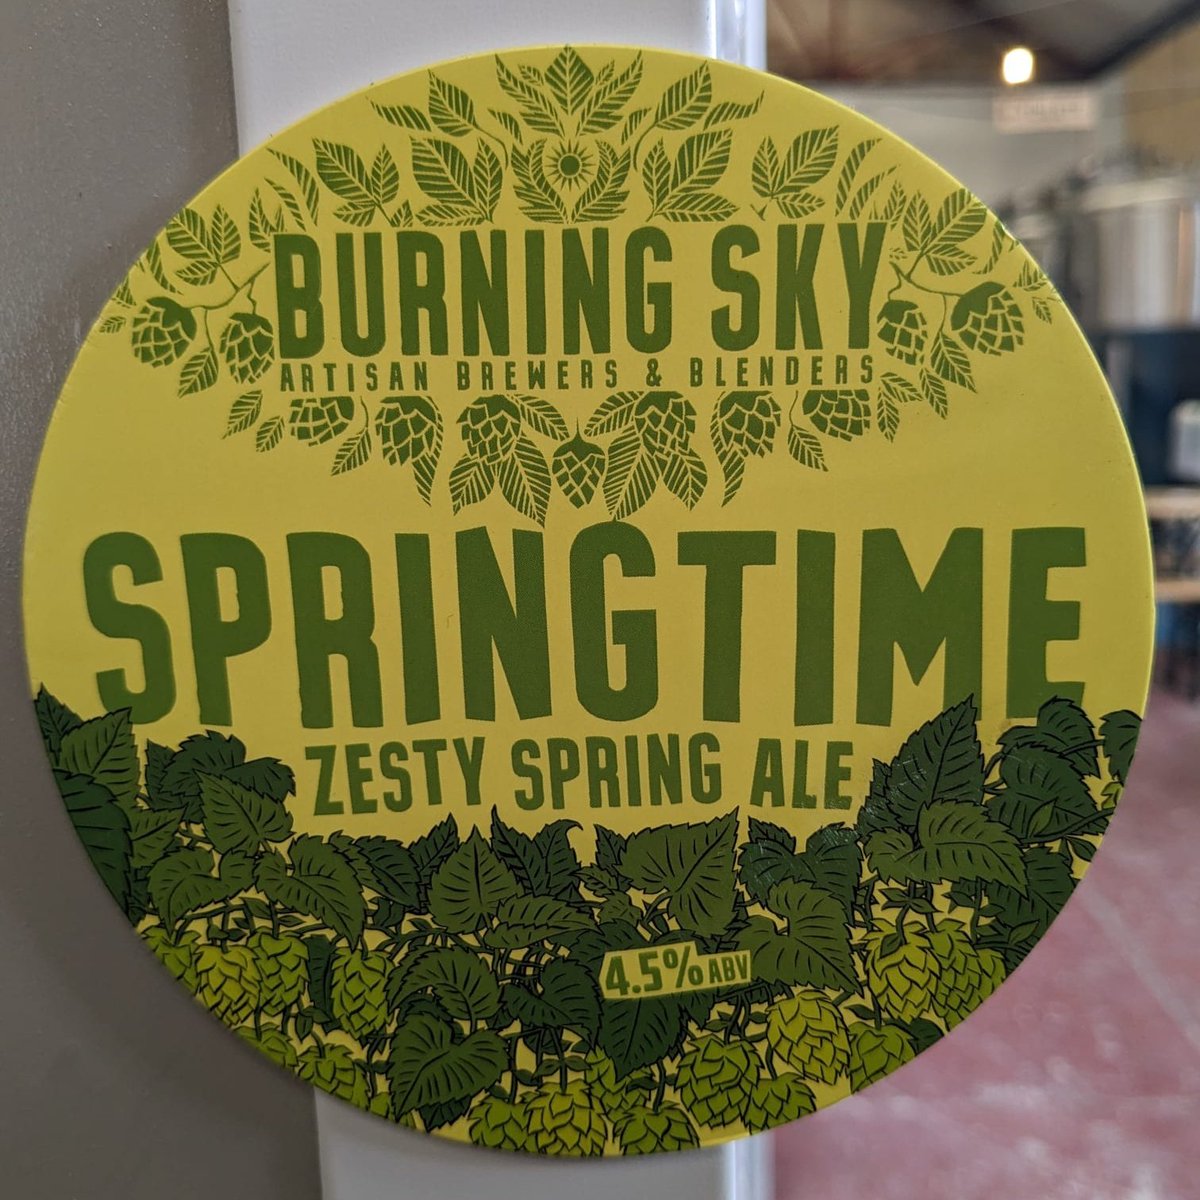 This weekend's option for all our loyal #casktronauts: @burningskybeer Springtime 4.5% zesty spring ale. Yes pls @BeersInChester @CamraChester